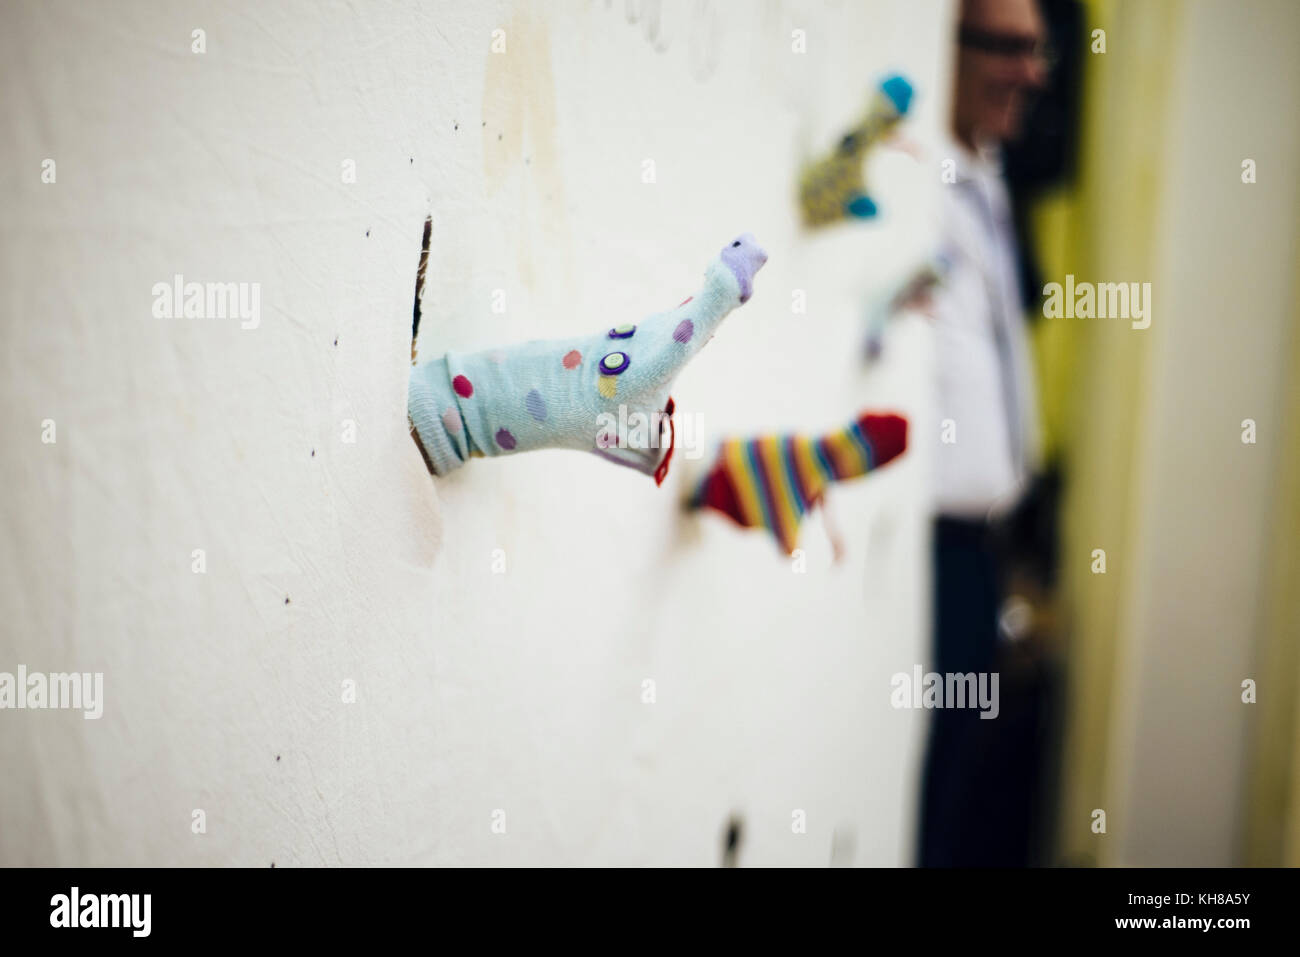 theater with drawn socks Stock Photo